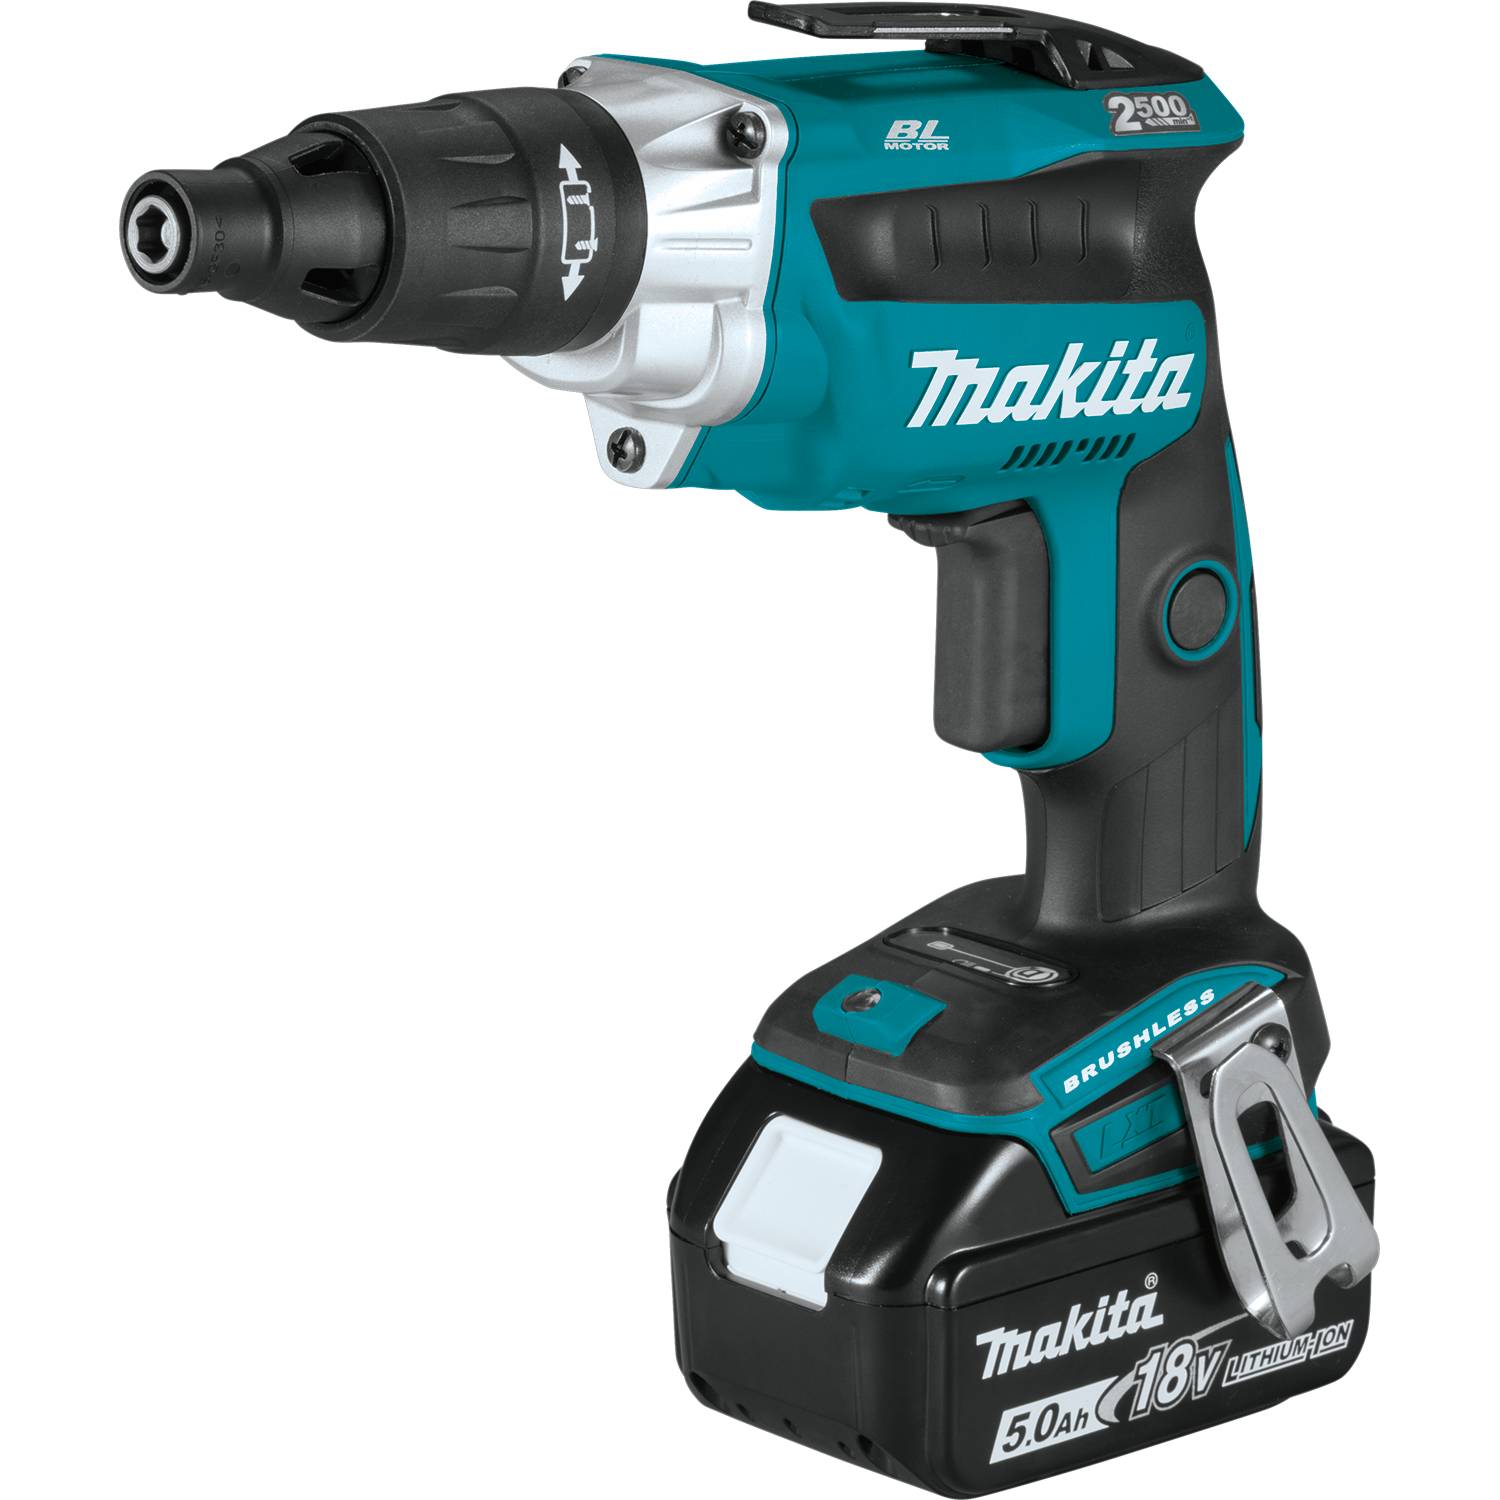 Makita 18V LXT Lithium-Ion Brushless 2500 RPM Cordless Screwdriver Kit from GME Supply